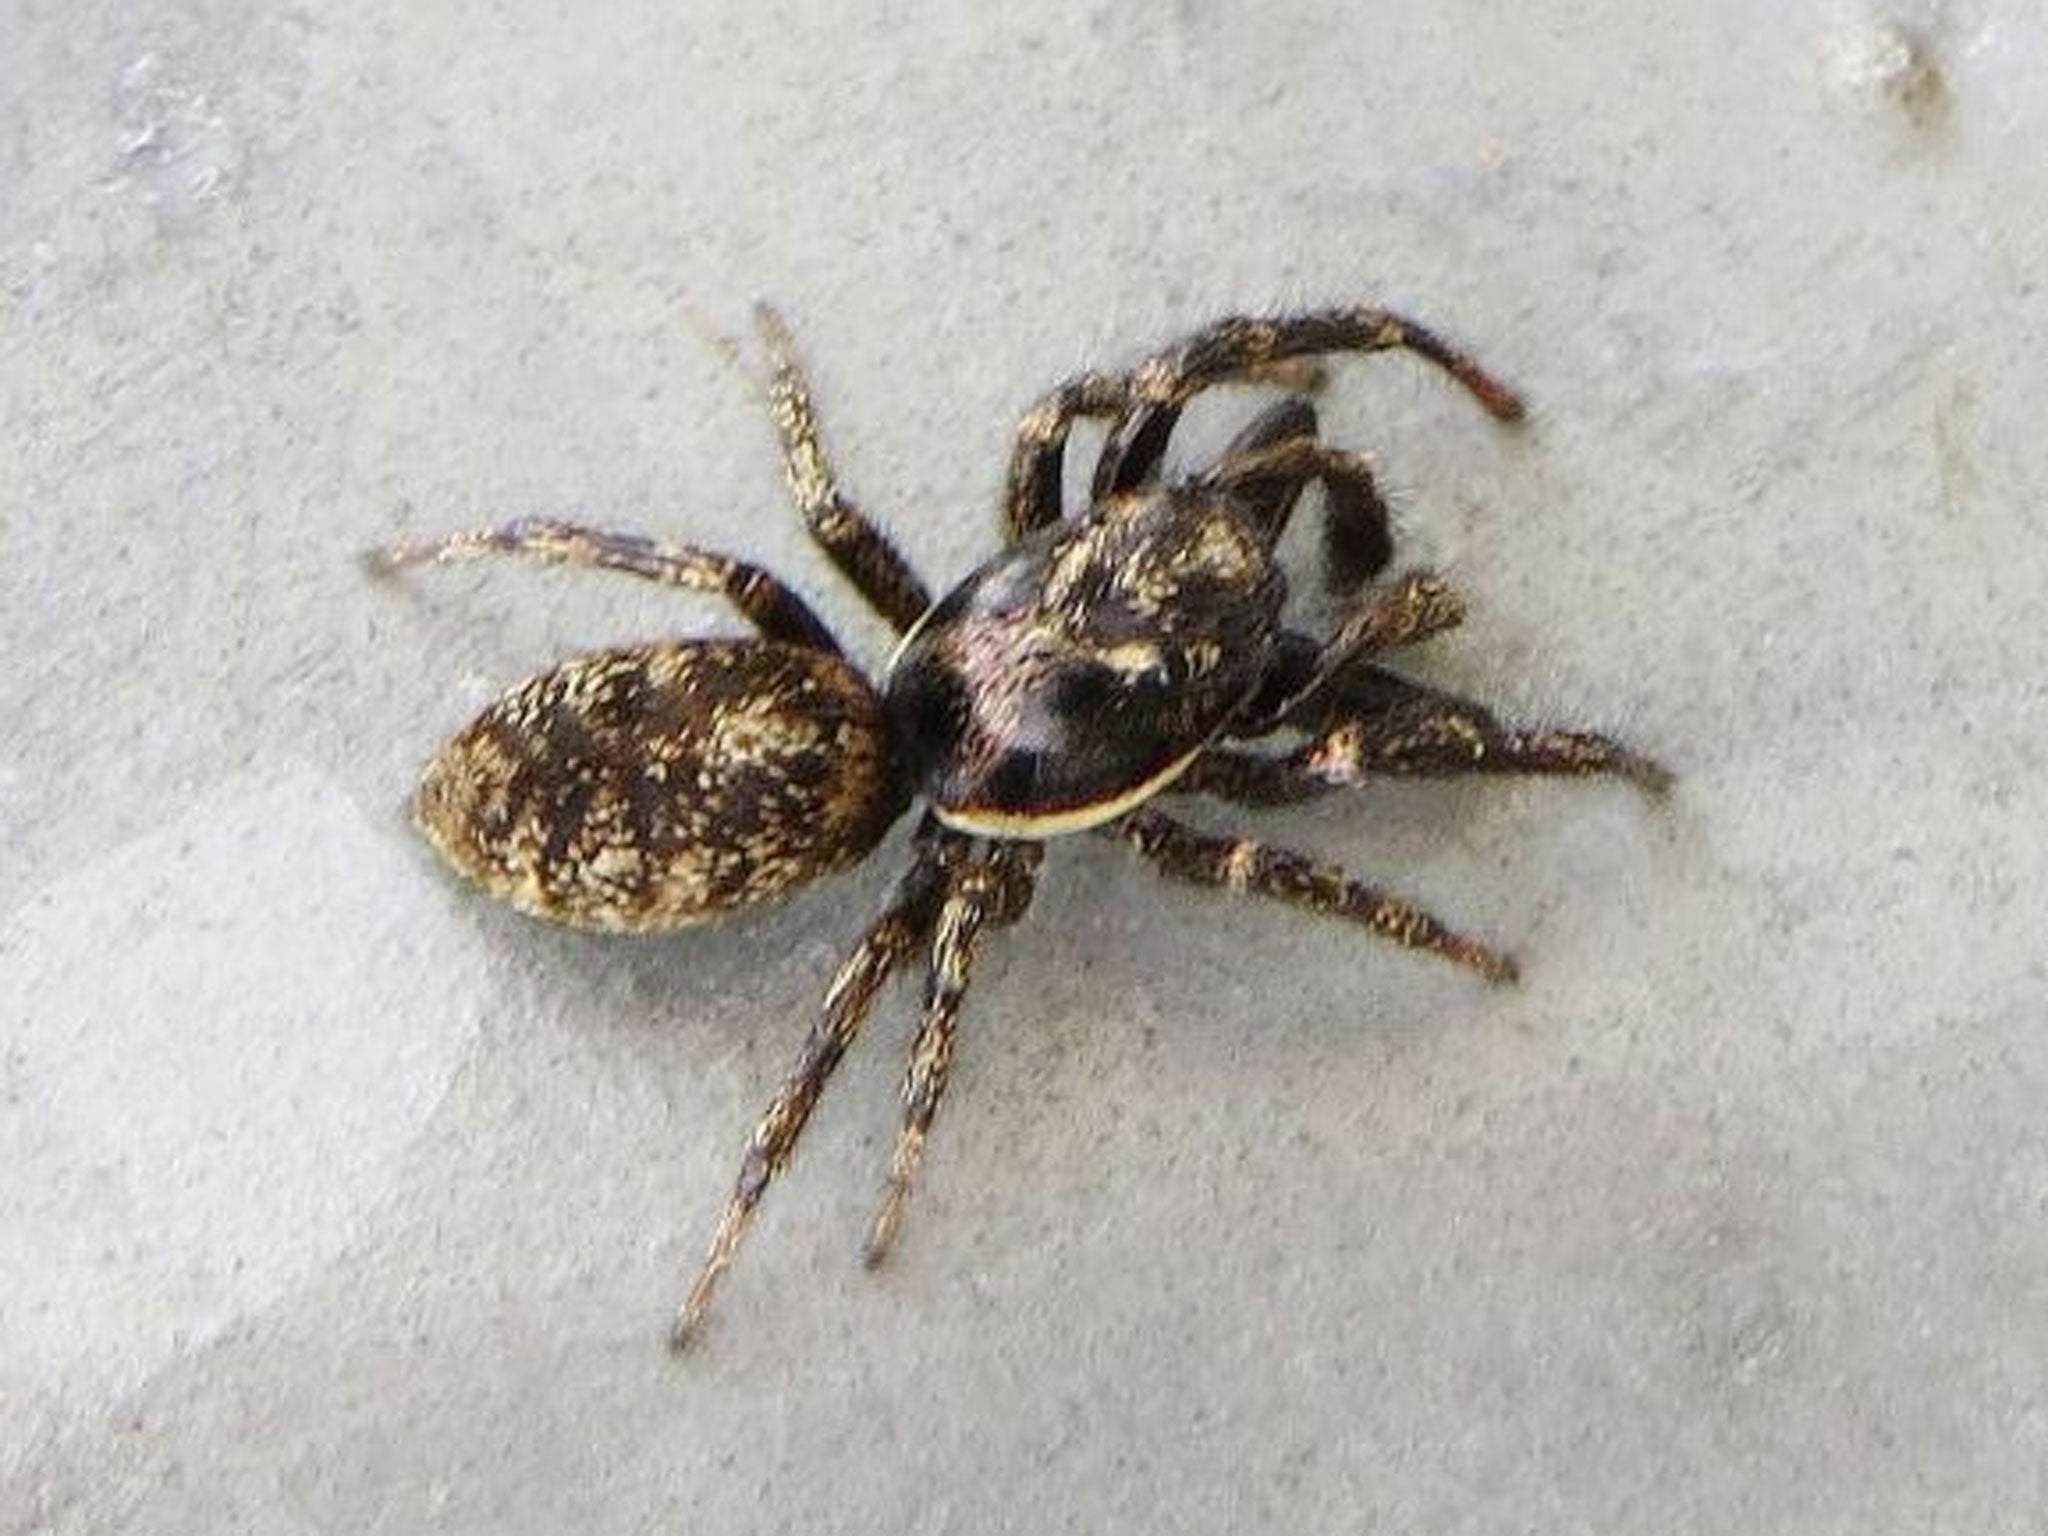 A jumping male spider